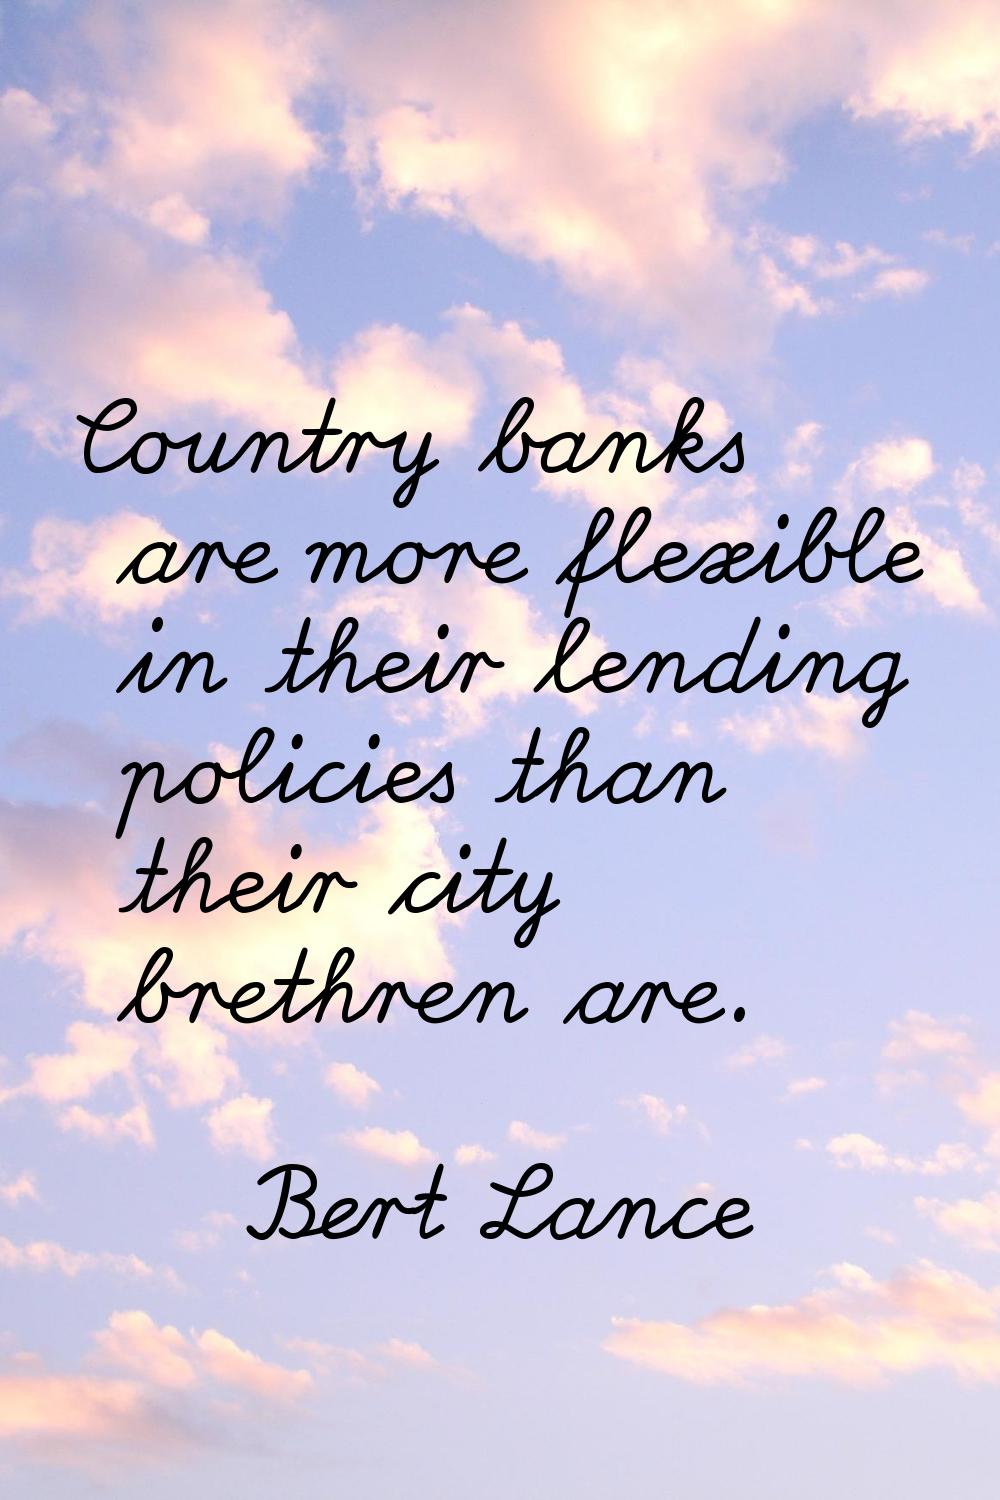 Country banks are more flexible in their lending policies than their city brethren are.